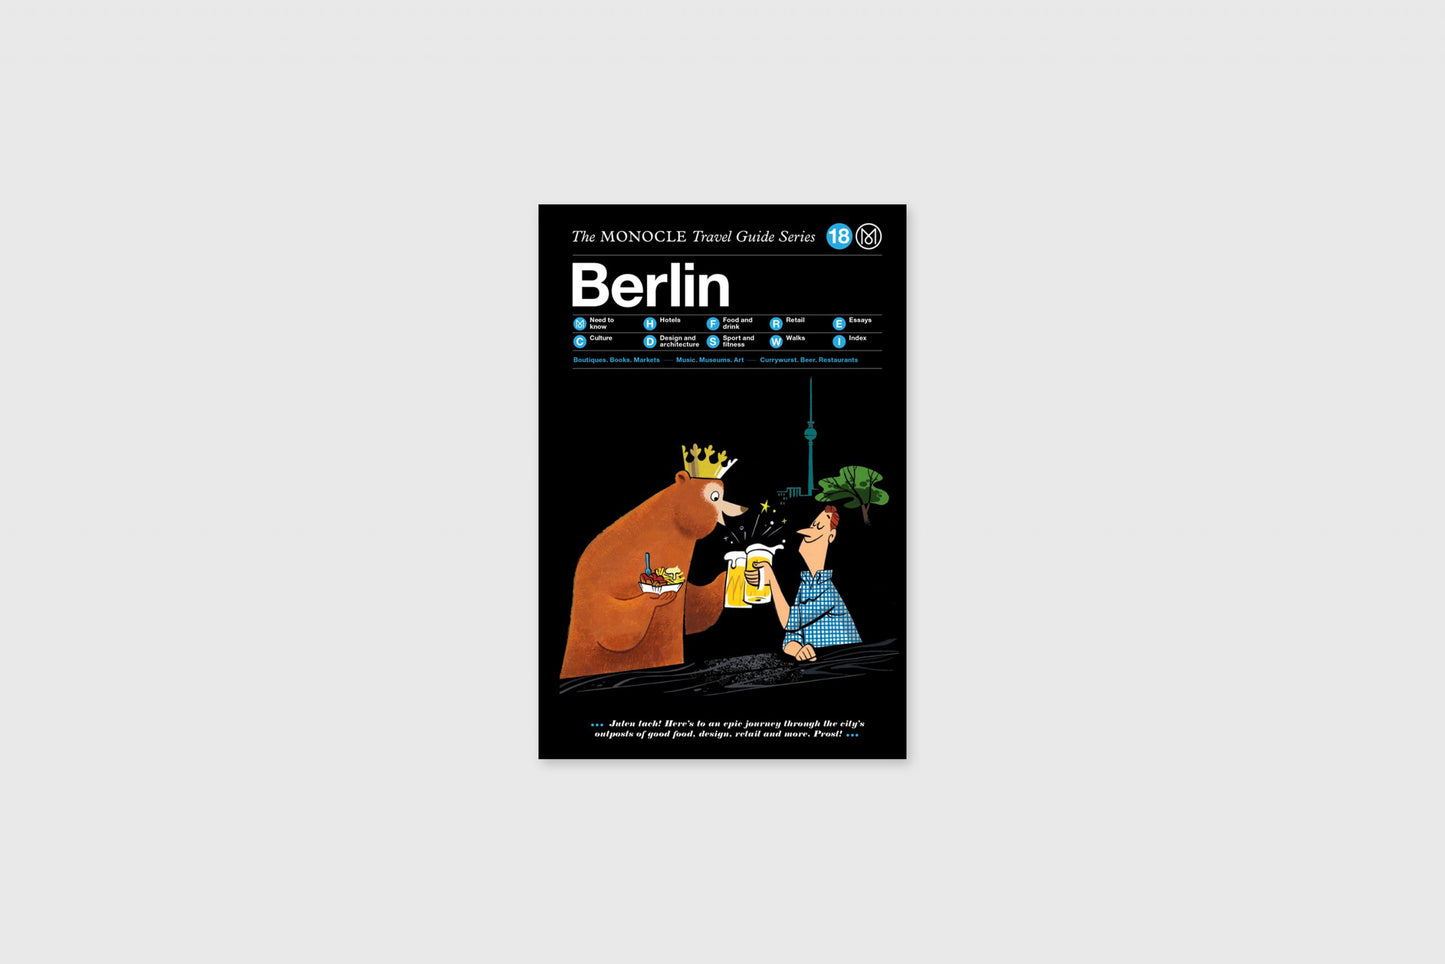 Berlin: The Monocle Travel Guide Series